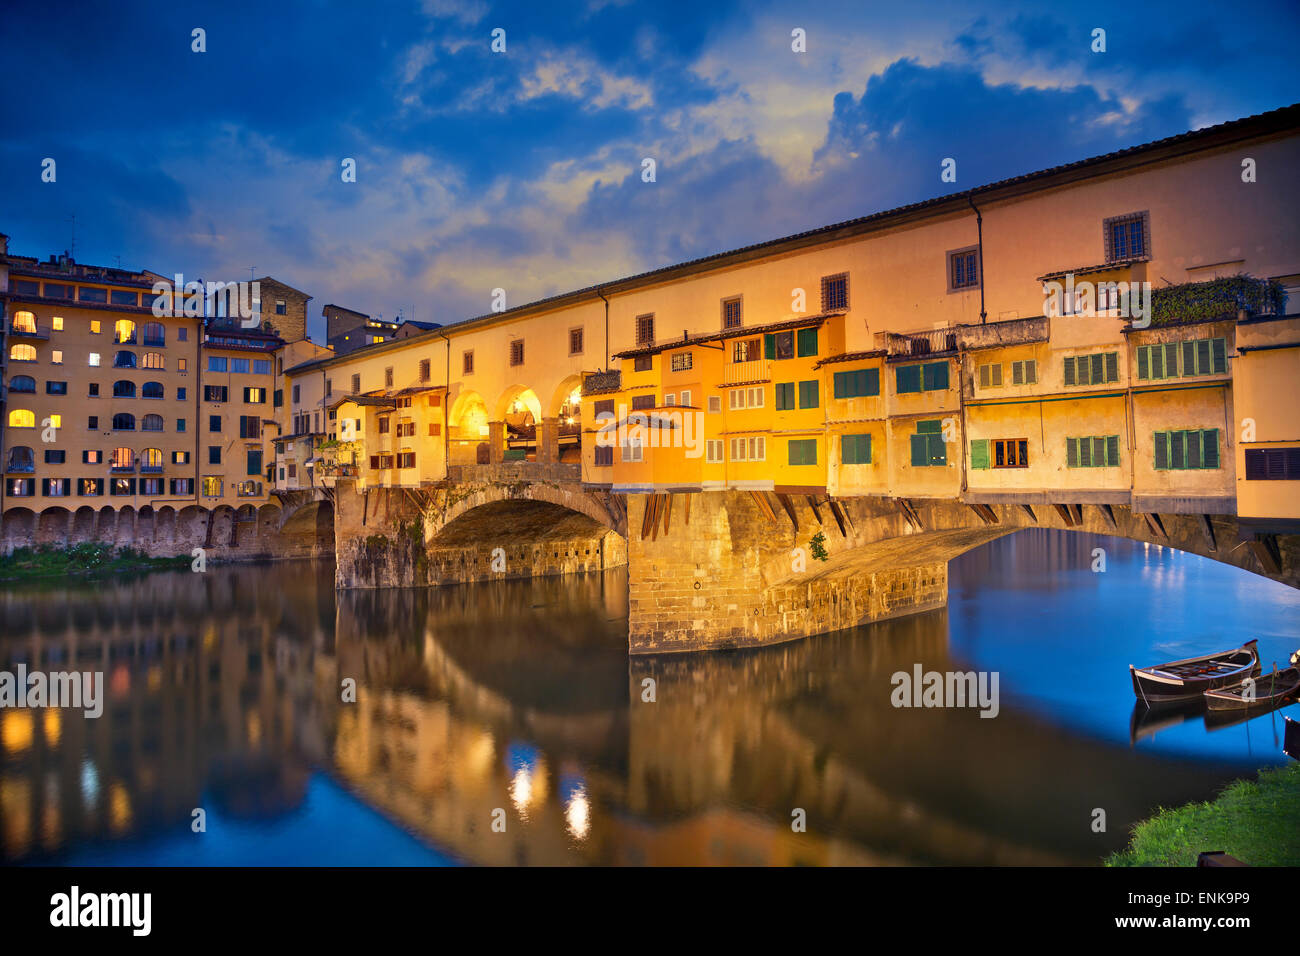 Florence. Image of Ponte Vecchio in Florence, Italy  at dusk. Stock Photo